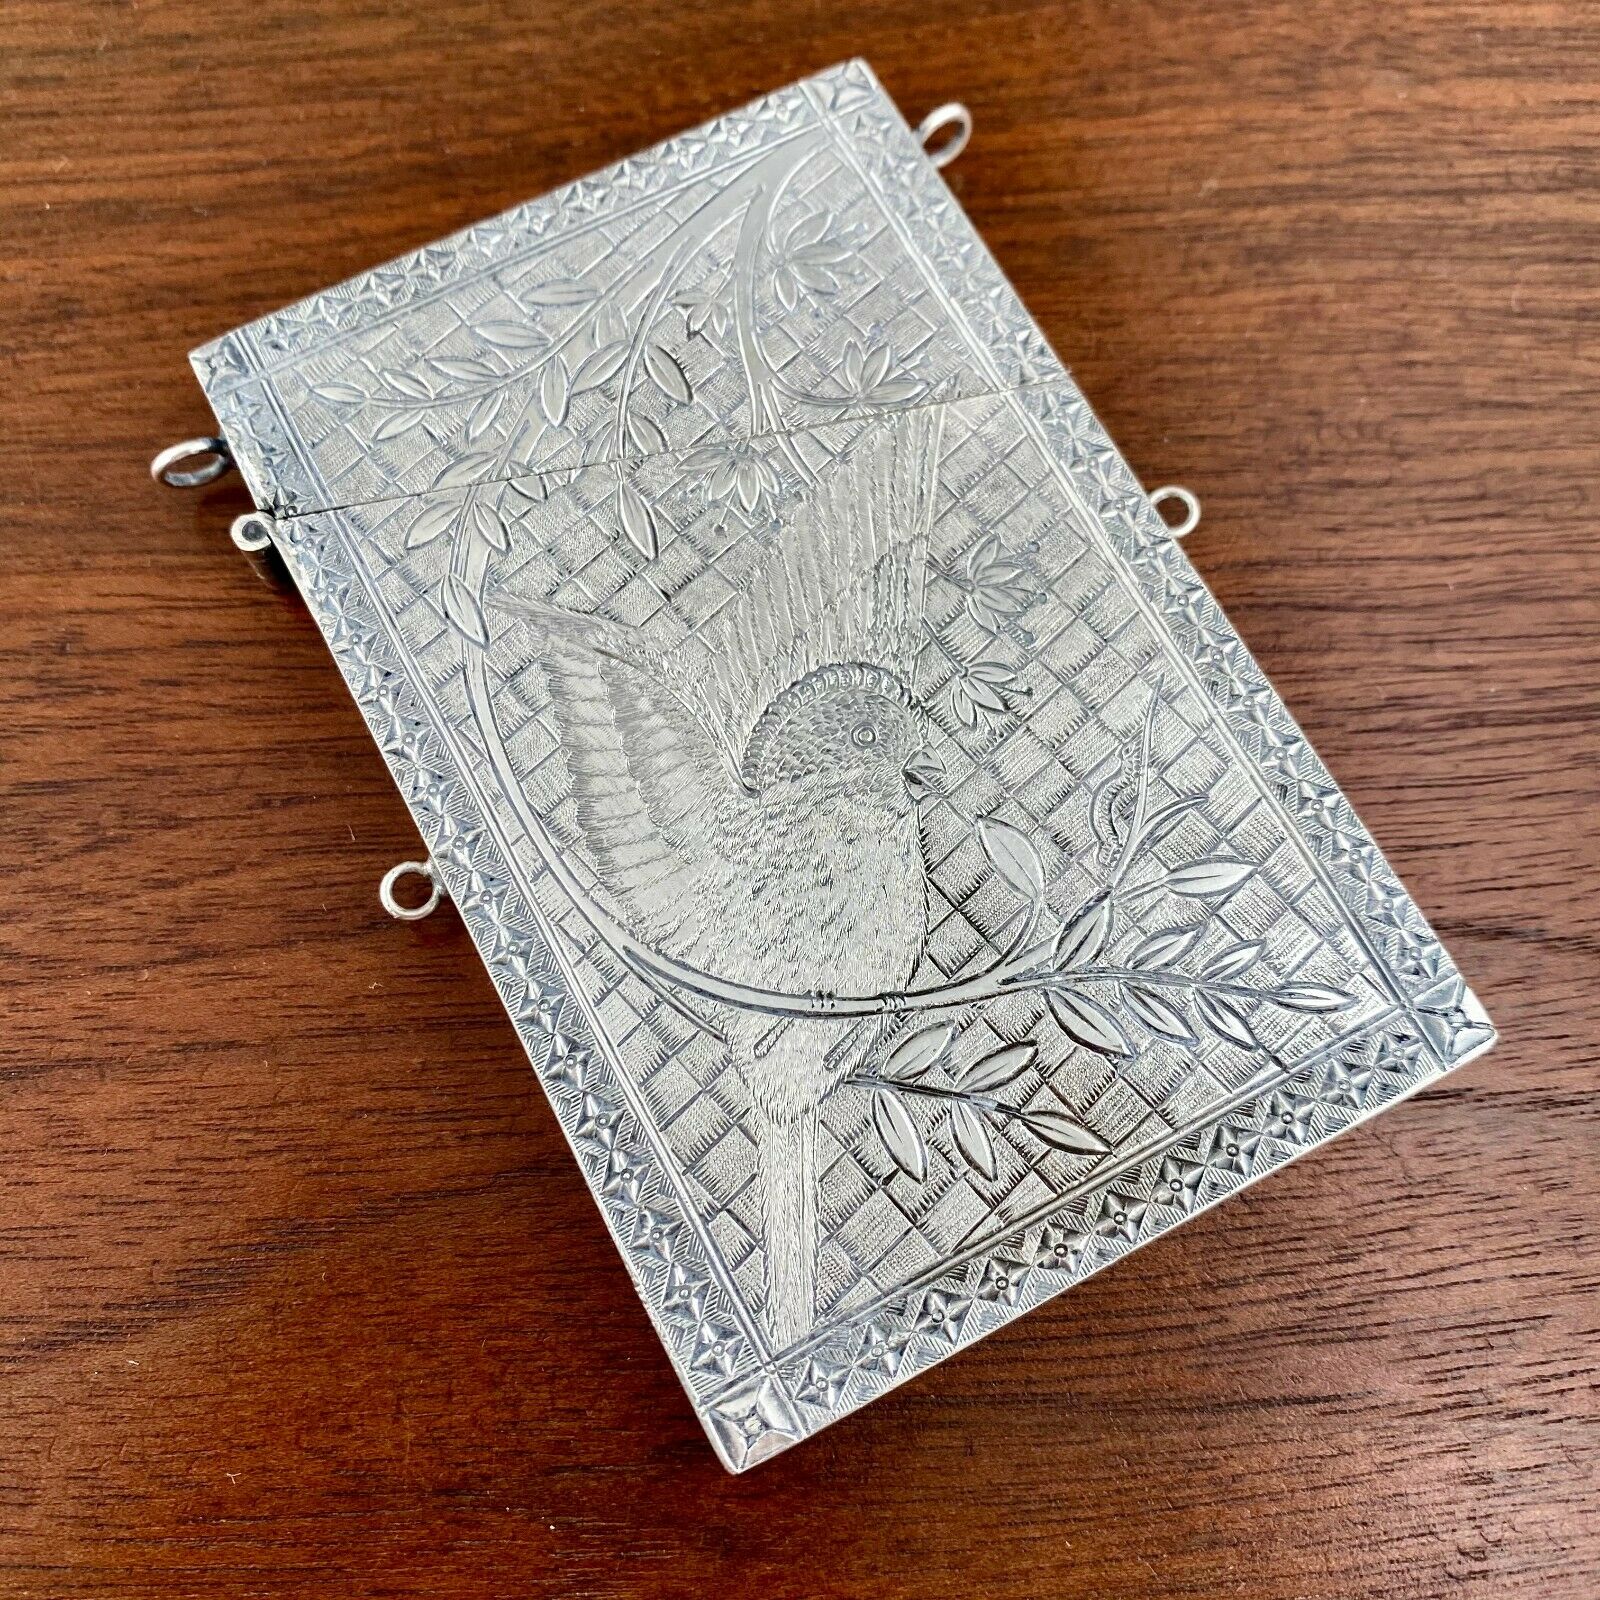 Antique Valuations: HEAVY GAUGE AESTHETIC COIN SILVER CARD CASE INTRICATELY ENGRAVED BIRD - NO MONO